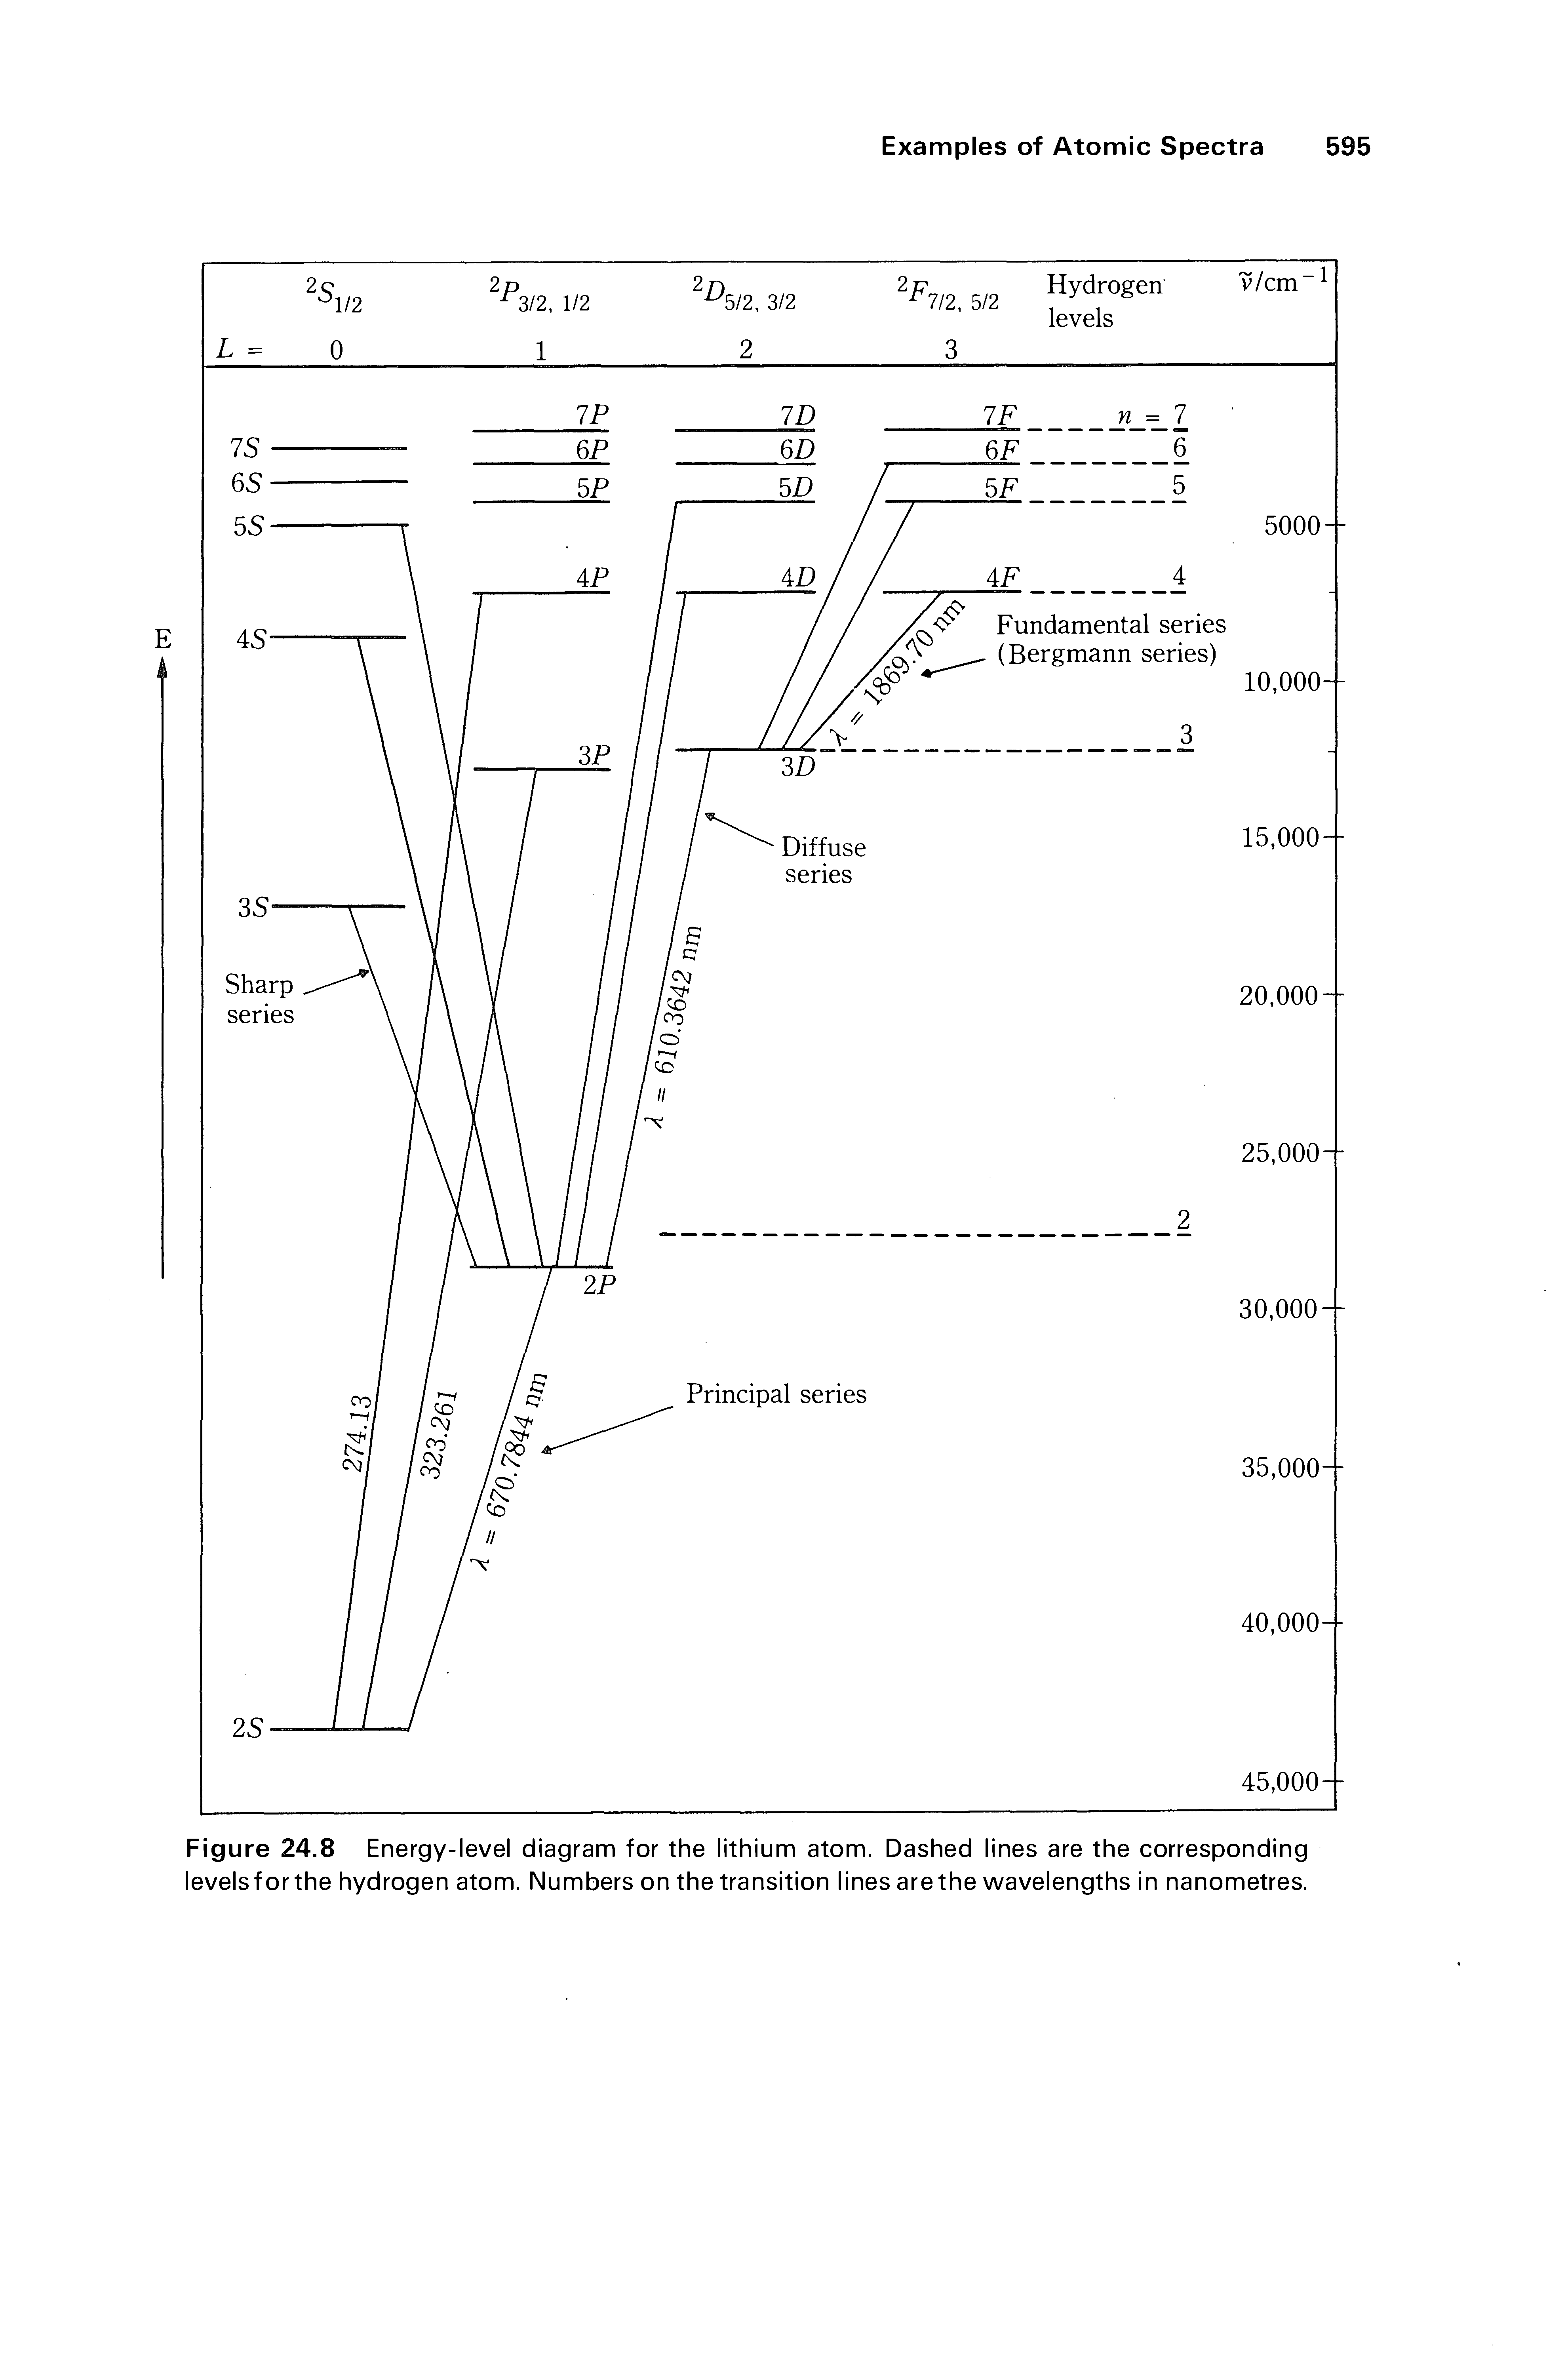 Figure 24.8 Energy-level diagram for the lithium atom. Dashed lines are the corresponding leveisforthe hydrogen atom. Numbers on the transition lines arethe wavelengths in nanometres.